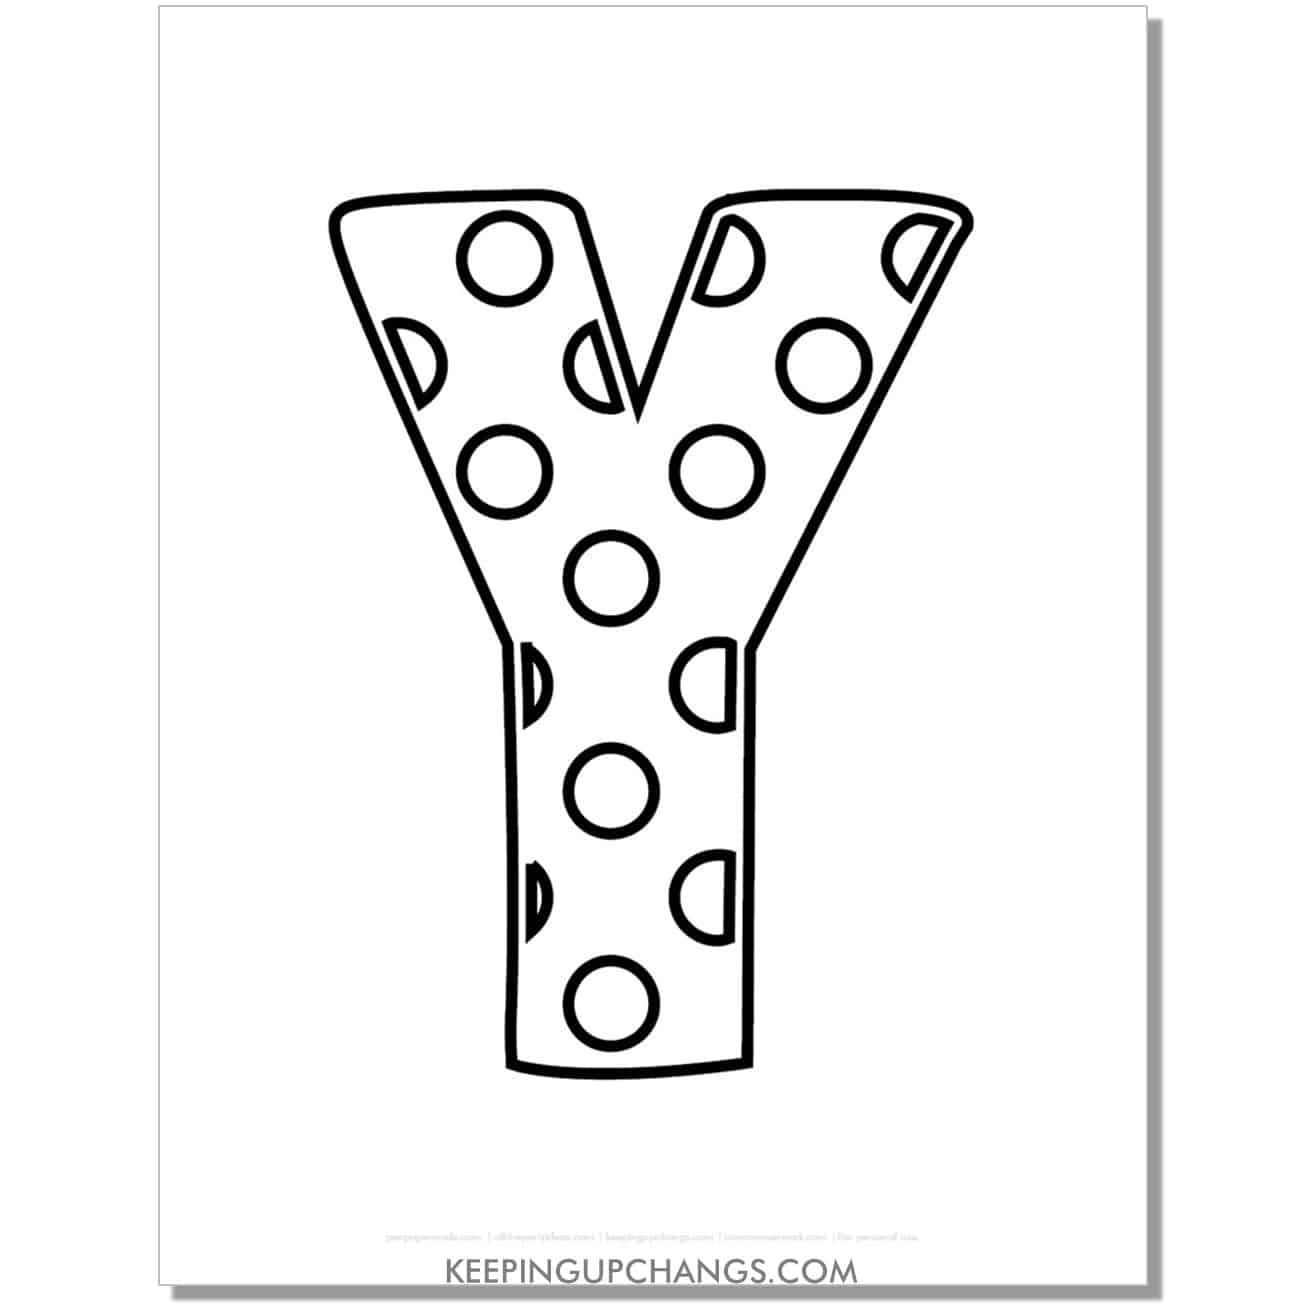 free alphabet letter y coloring page with polka dots for toddlers, preschool, kindergarten.